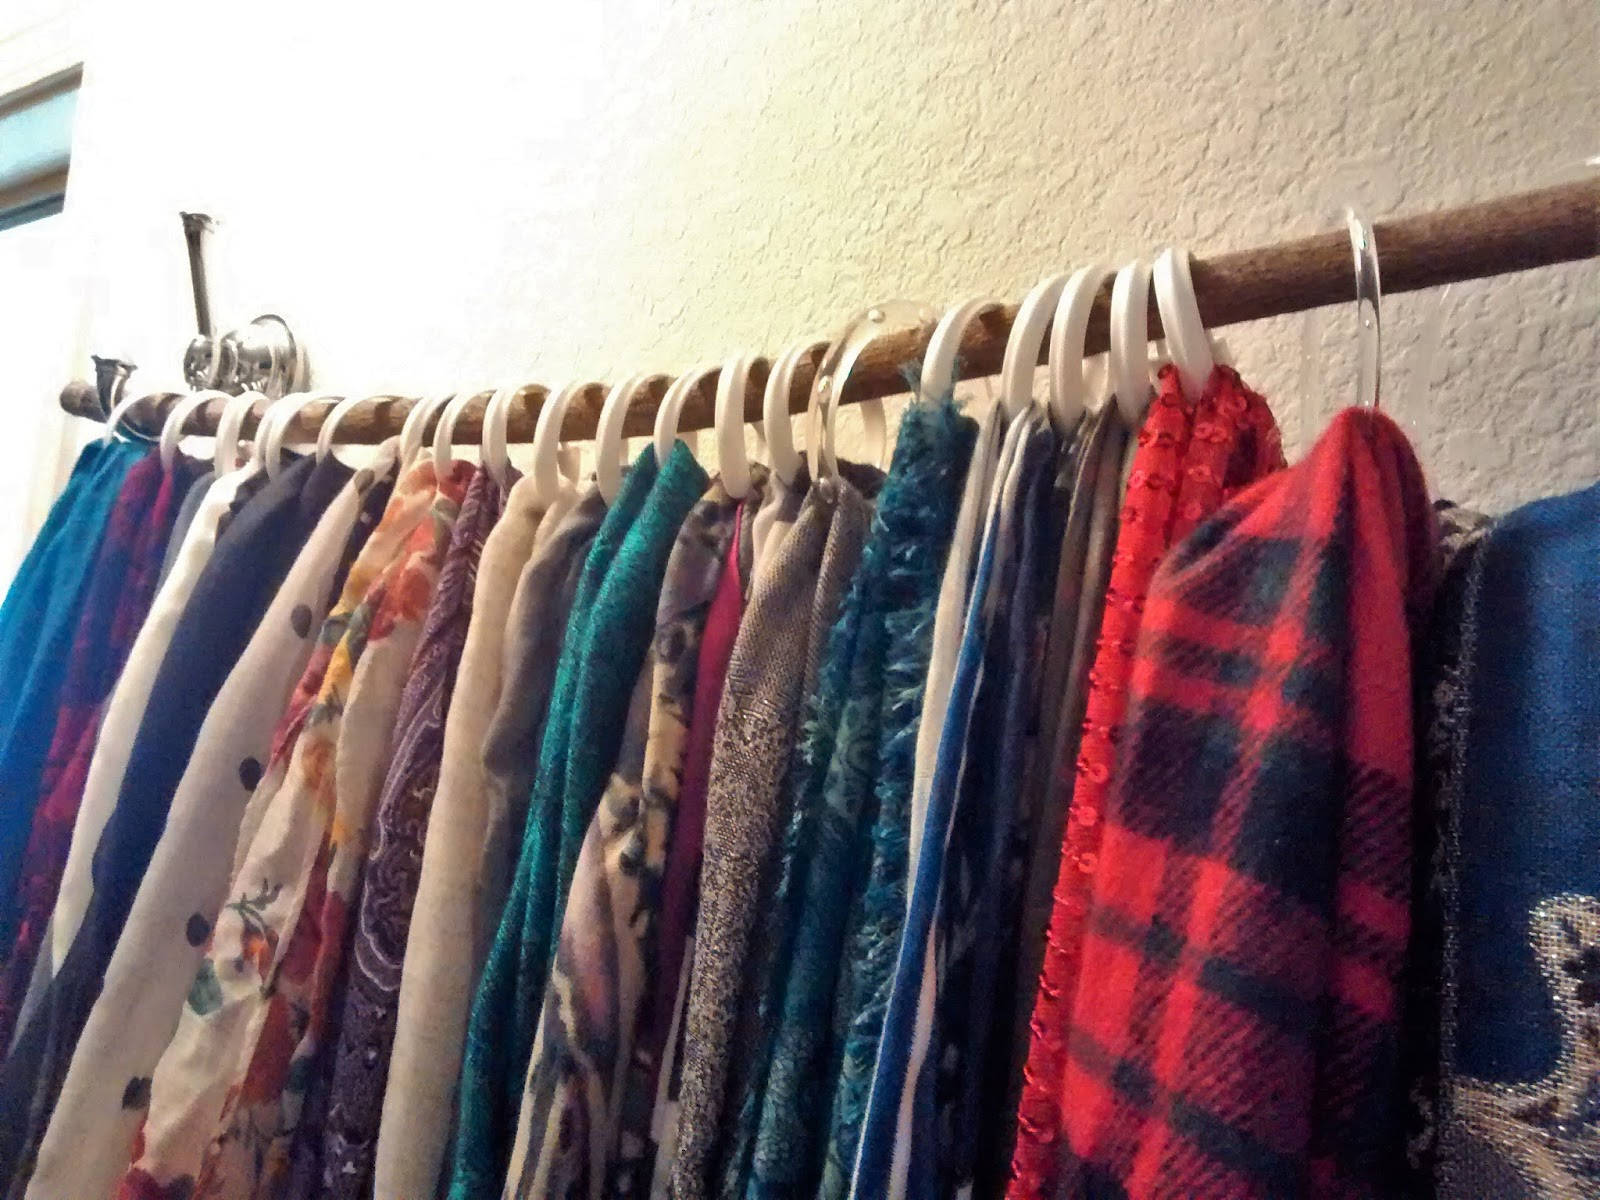 Best ideas about DIY Scarf Hanger
. Save or Pin Simply Wright DIY Scarf Organizer Hanger Now.